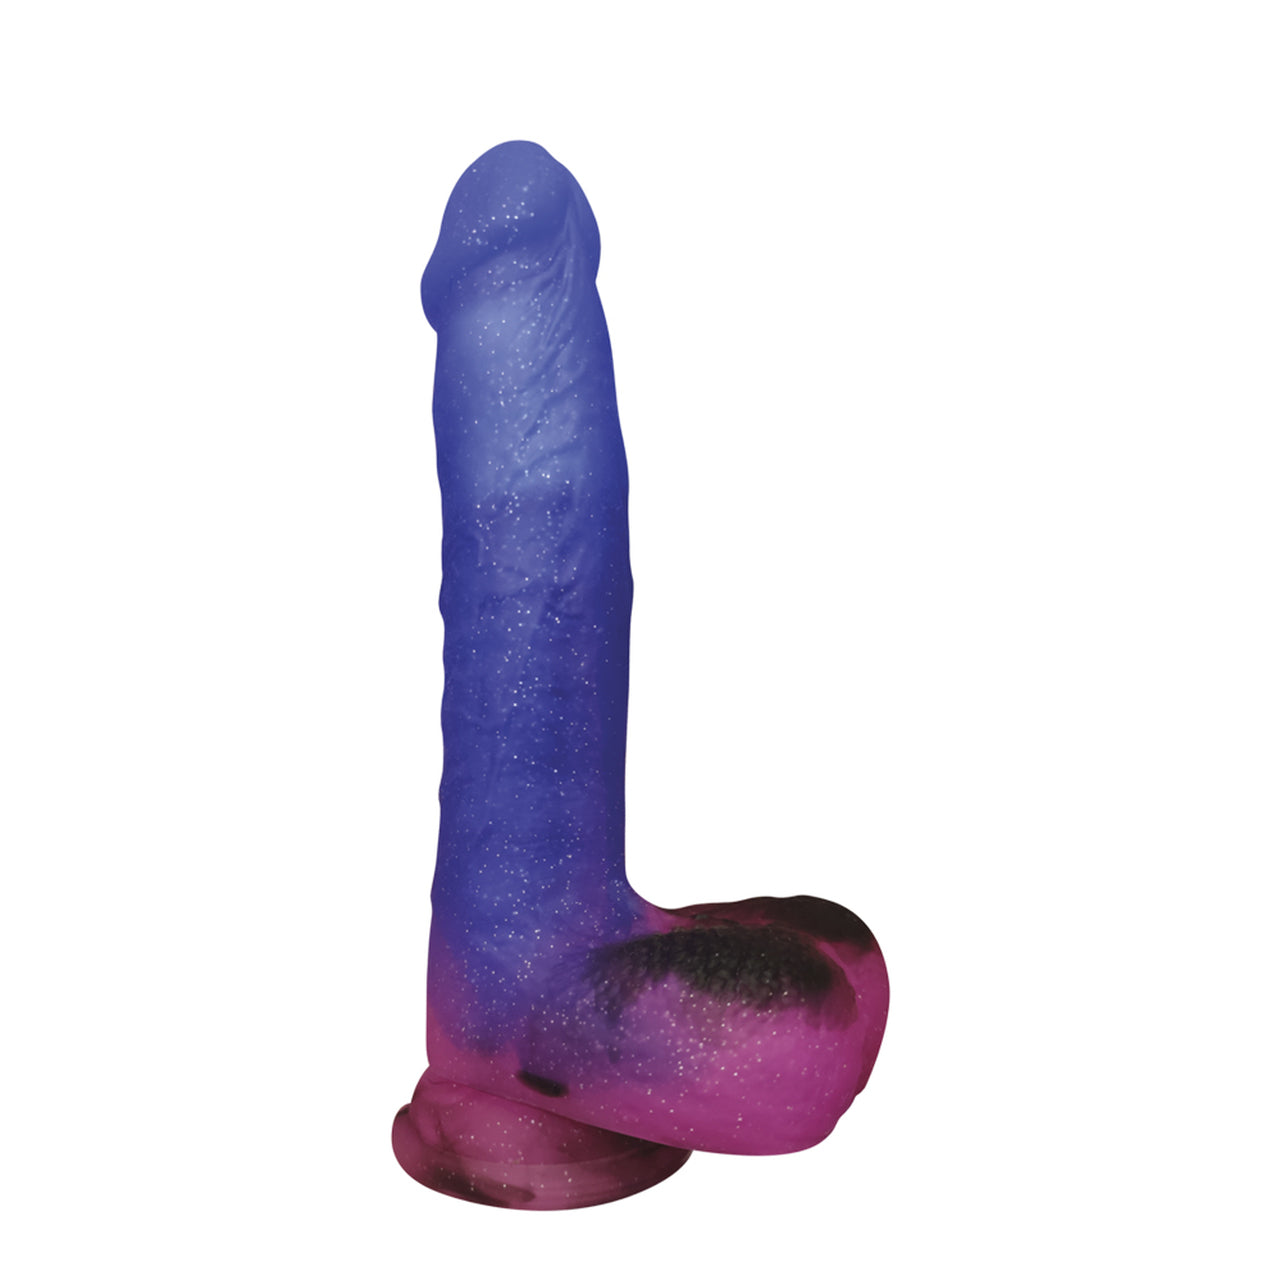 The right side view of the Stardust Milky Way Vibrating Silicone Dildo.